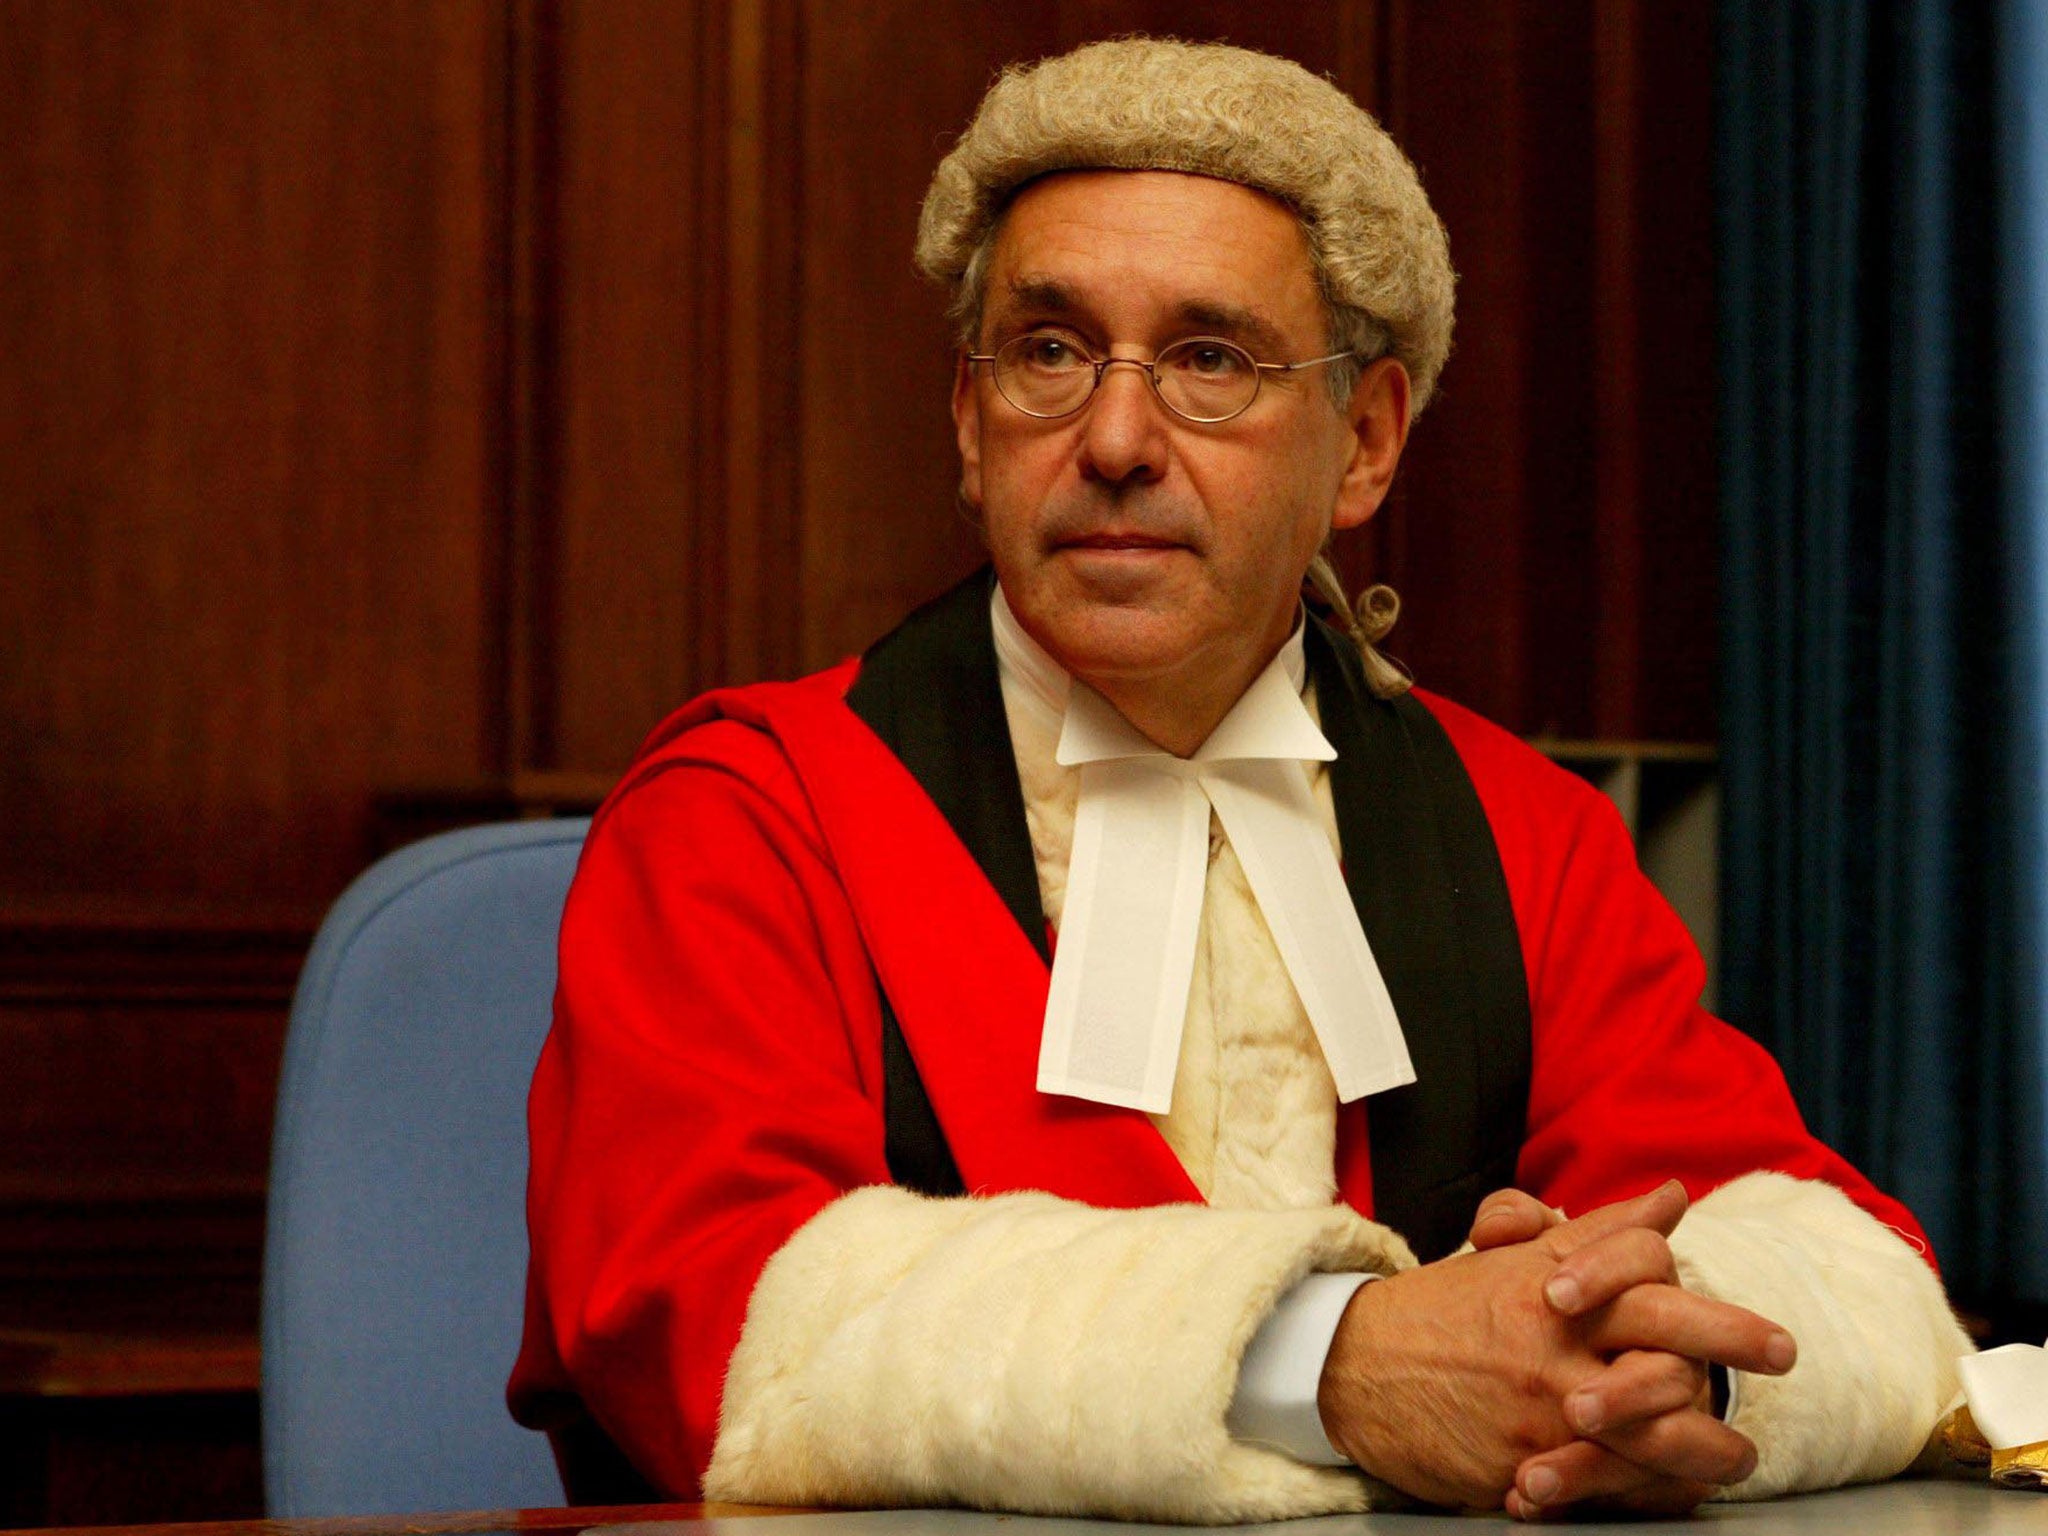 Before taking up his present role, former judge Sir Alan Moses was a Lord Justice of Appeal